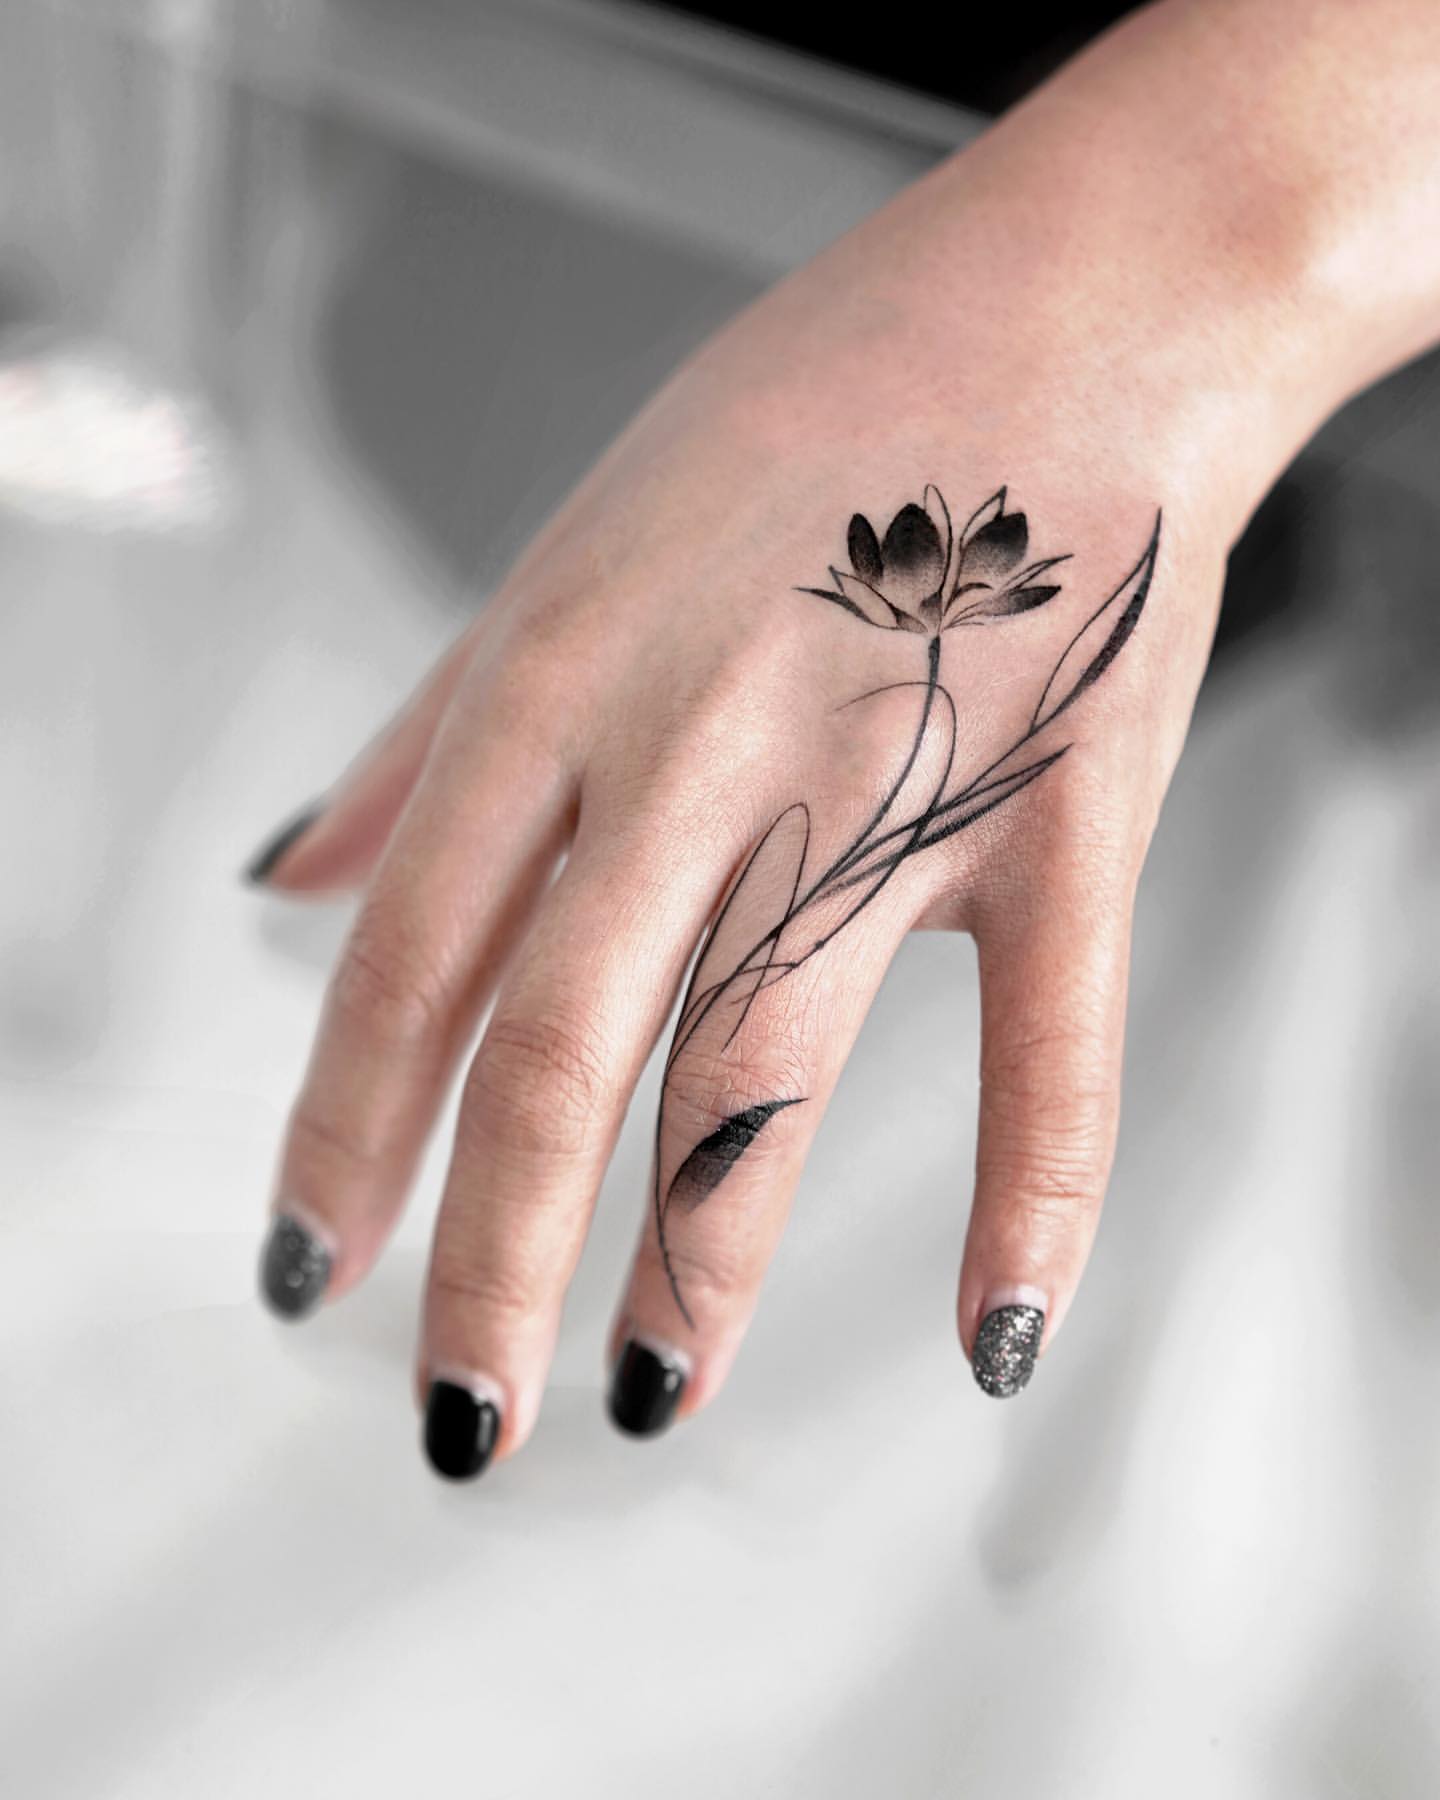 40 Sweet Wedding Ring Tattoos You'll Want to Copy-totobed.com.vn